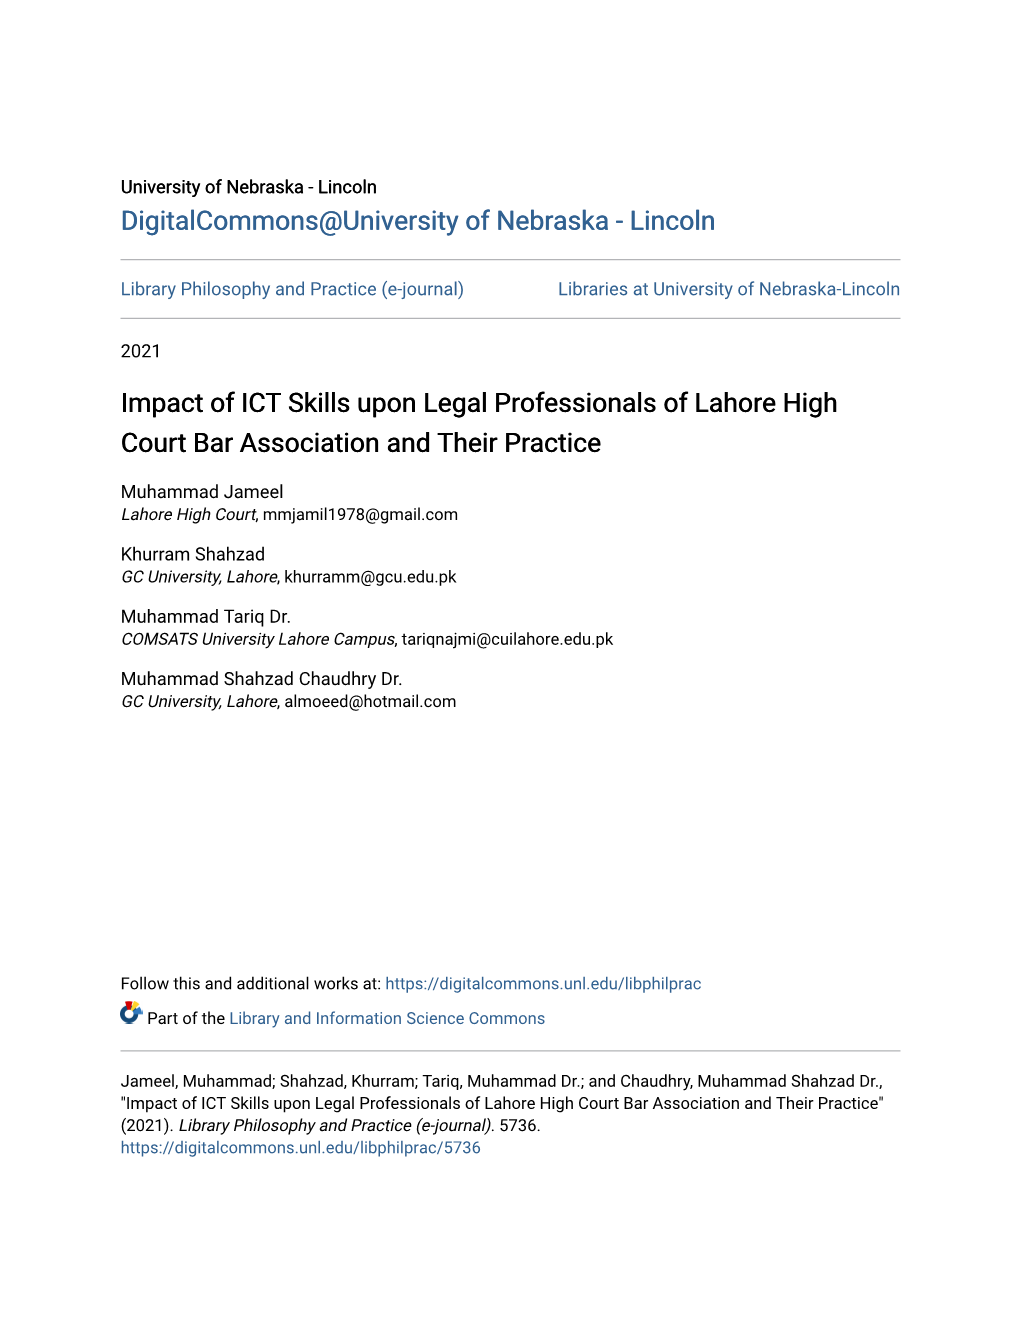 Impact of ICT Skills Upon Legal Professionals of Lahore High Court Bar Association and Their Practice